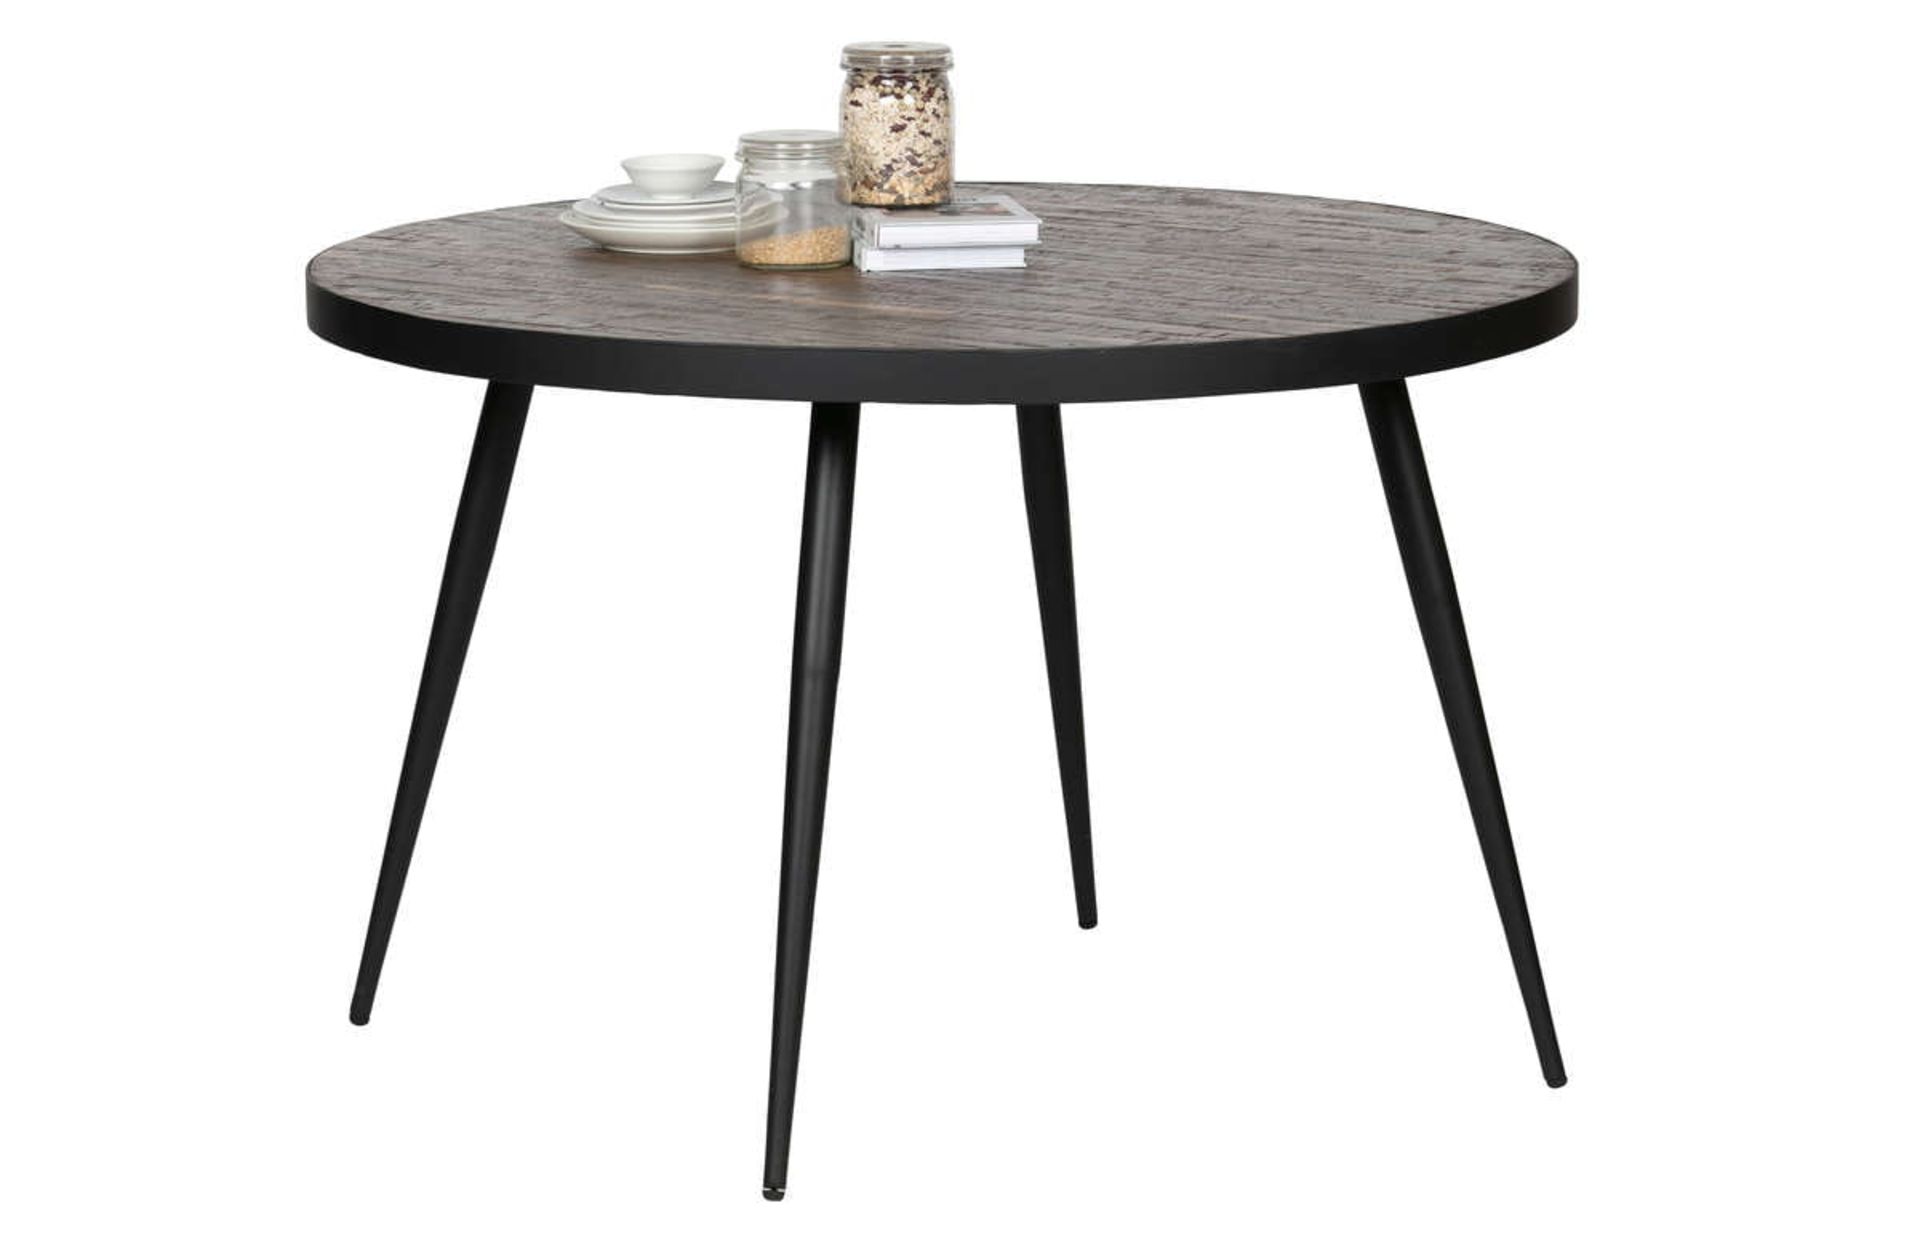 1 x Be Pure Home Vic Dining Table In A  Natural Wood Tone - Dimensions: 120(h) x 76(w) x 76(d)